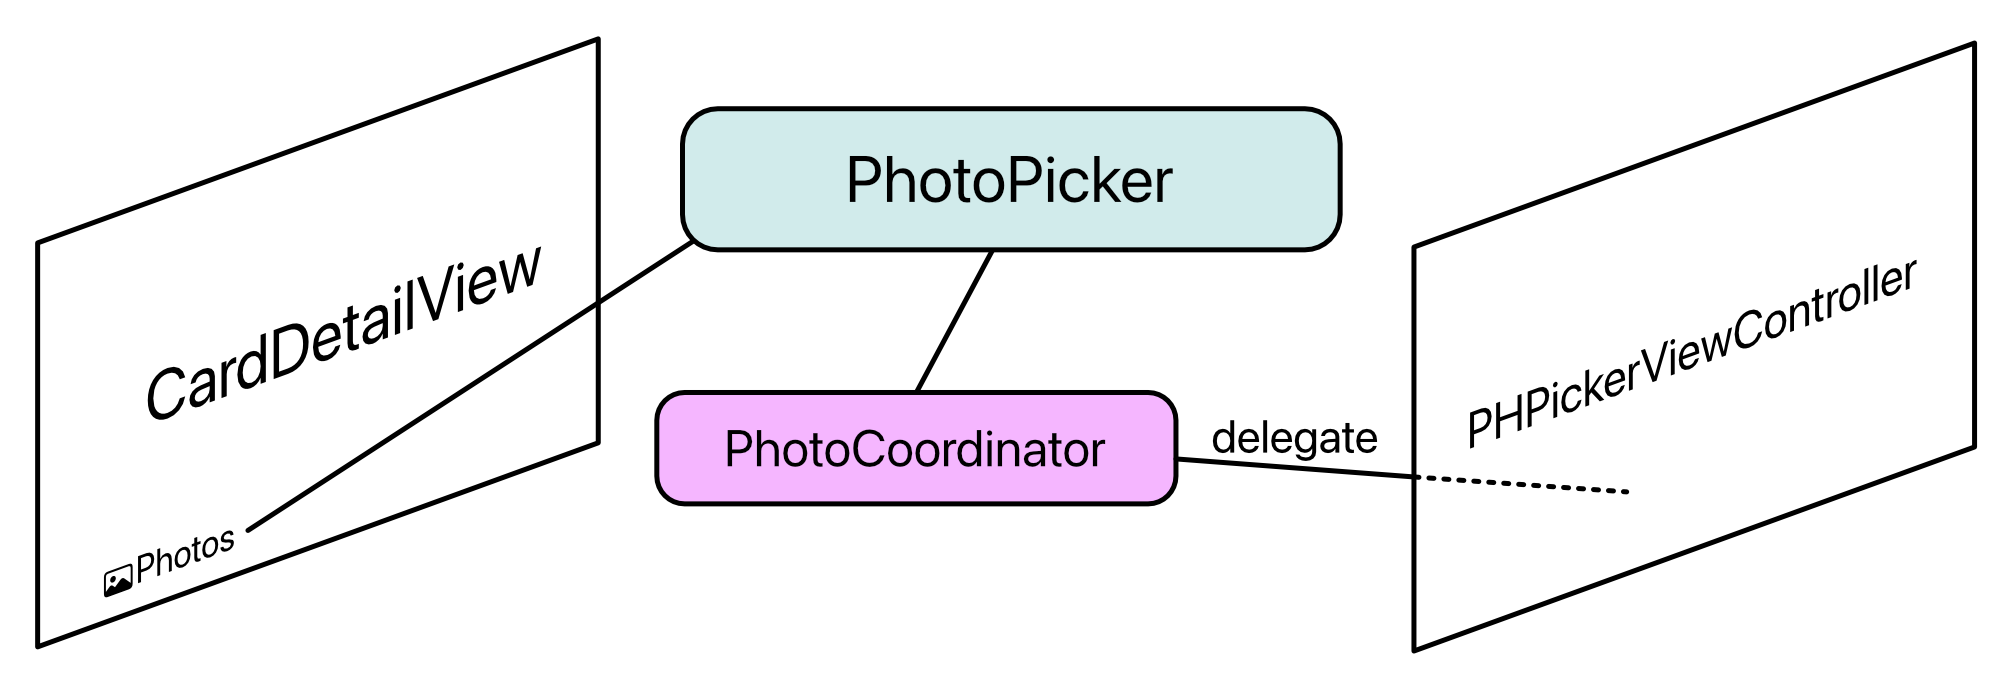 Representable PhotoPicker with delegation